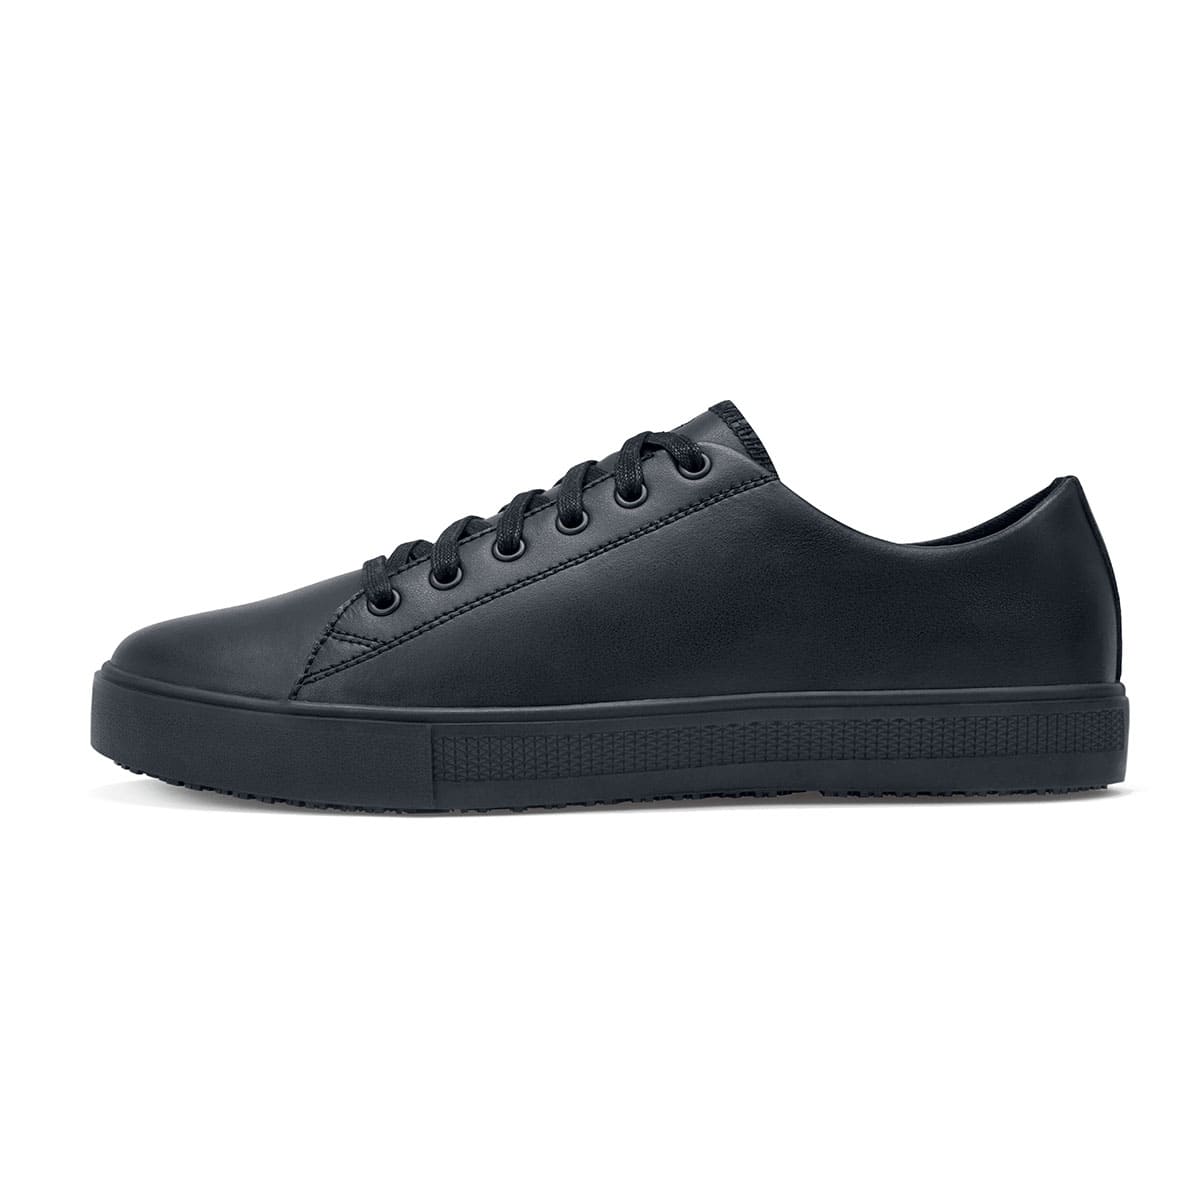 The Old School Low-Rider Black Gladiator Outsole from Shoes For Crews is a slip resistant lace-up shoe designed to provide comfort throughout the day, seen from the left.